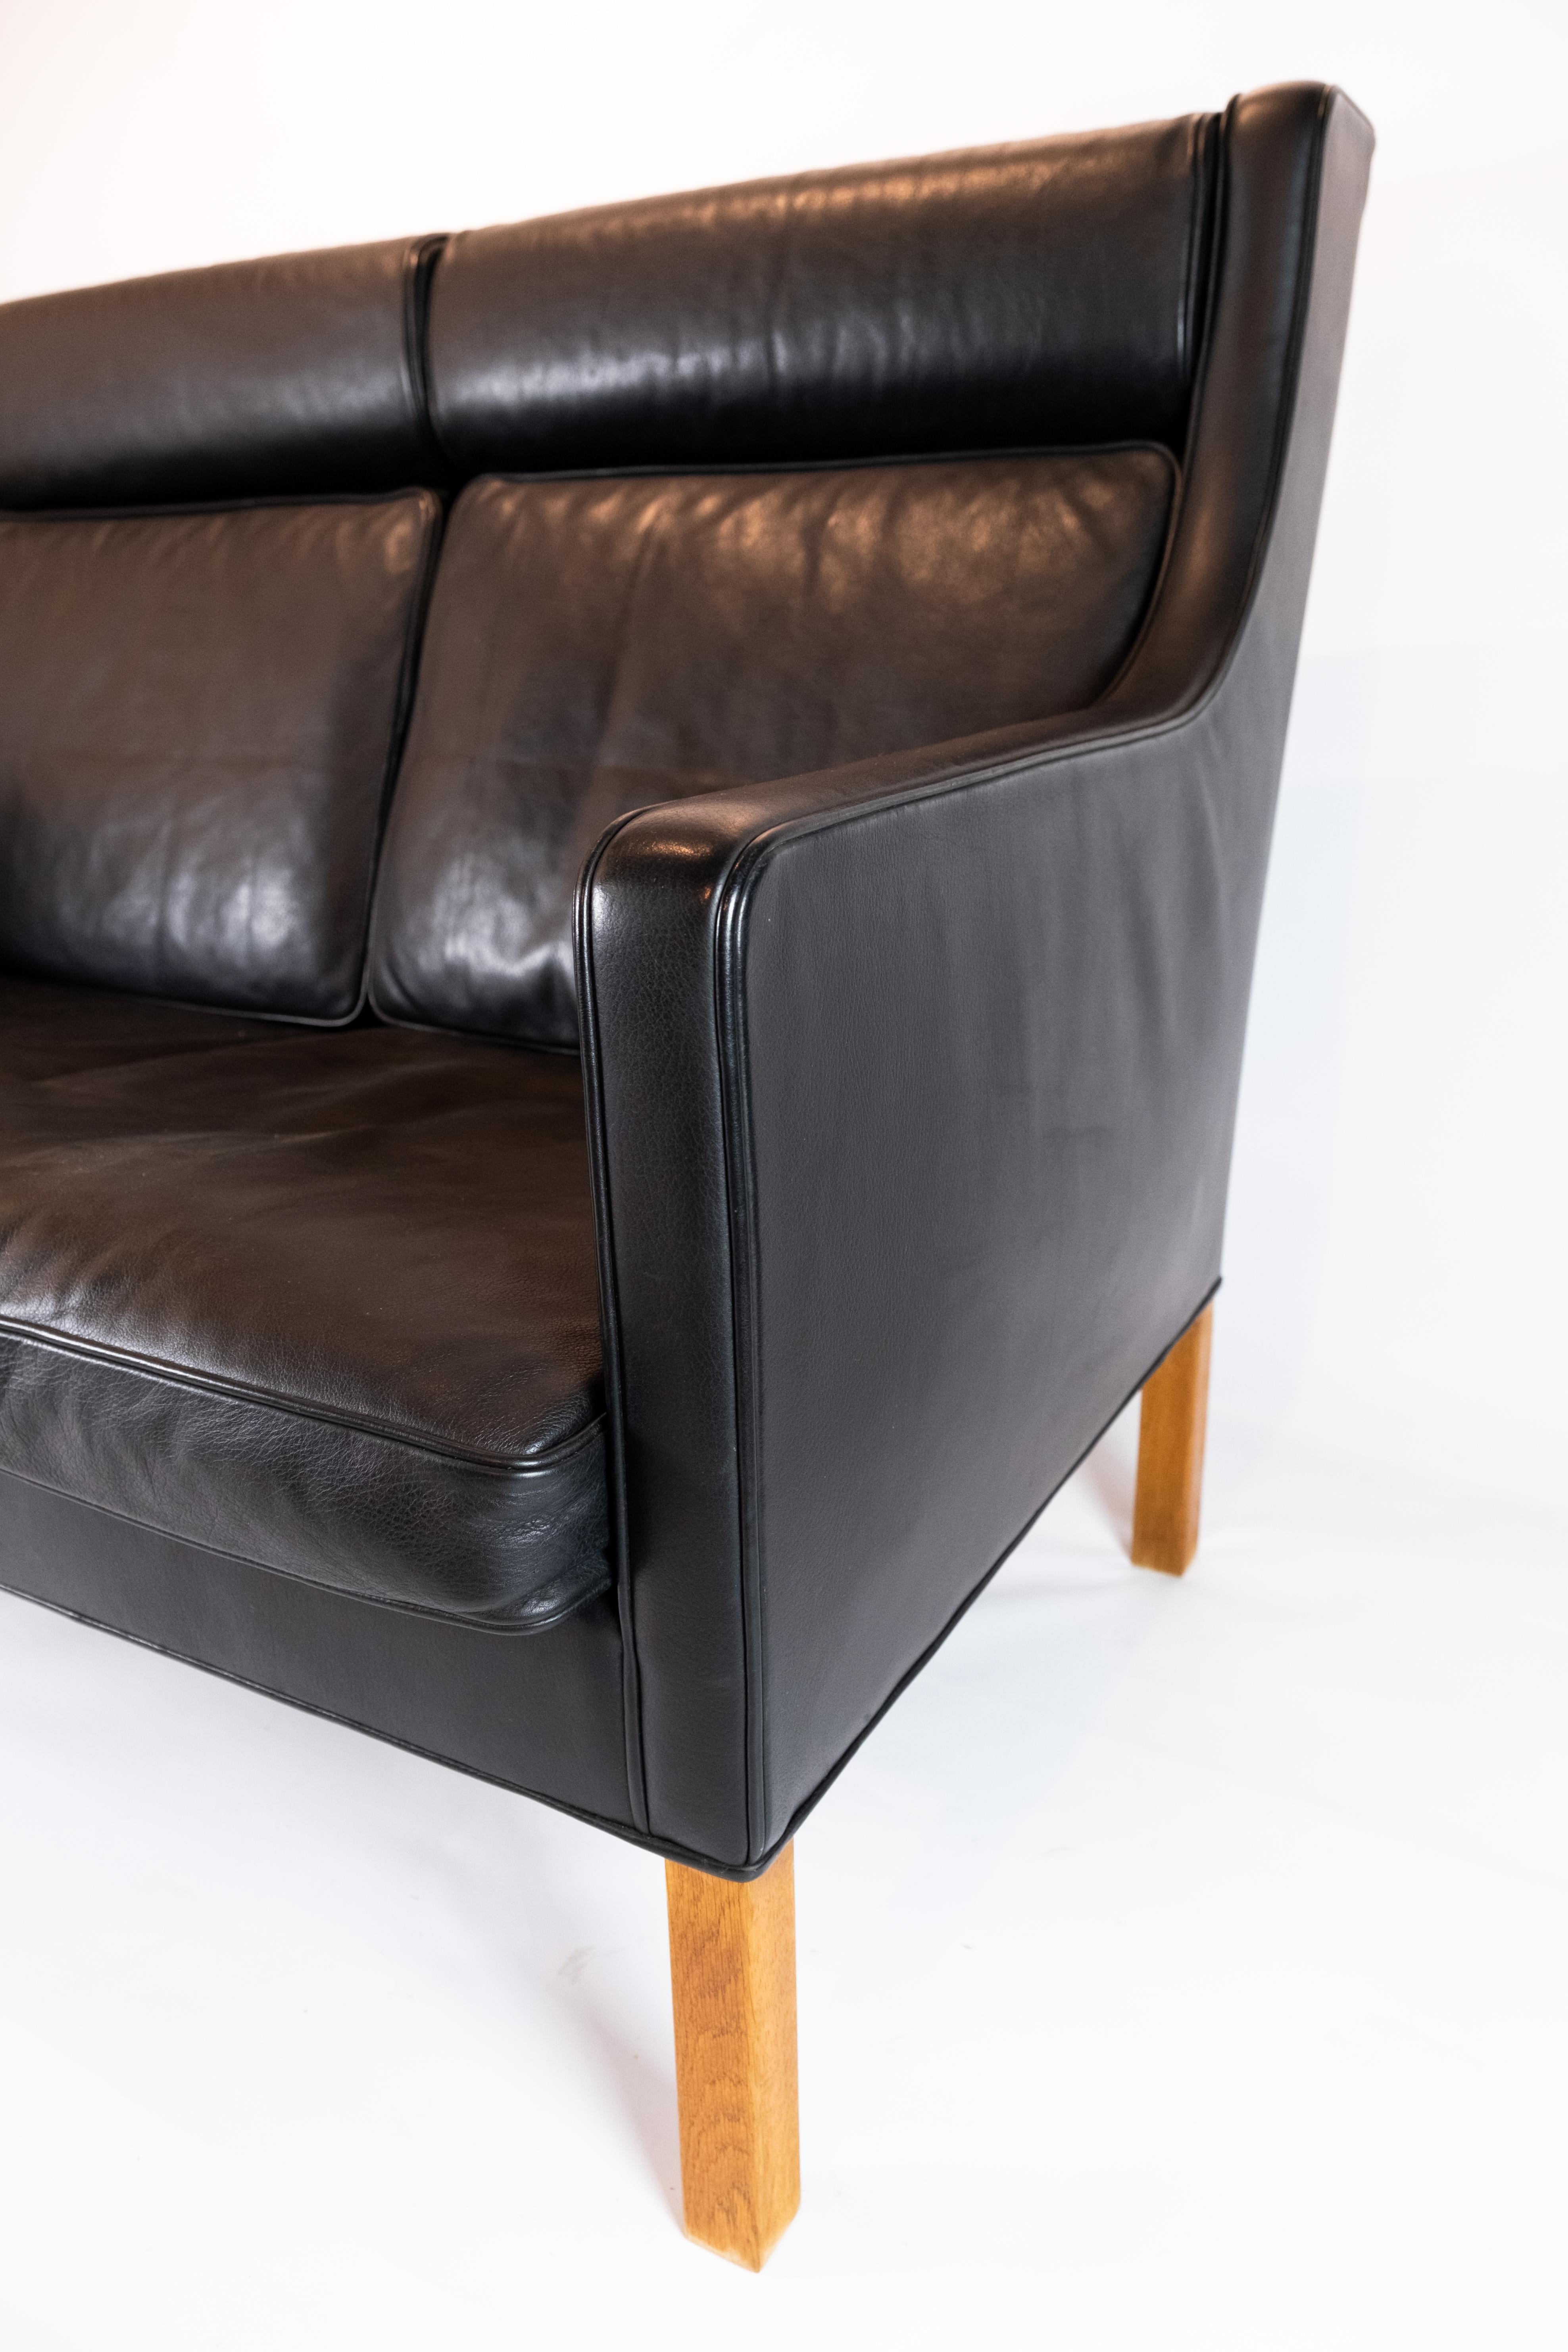 Kupe 2-Seat Sofa Model 2192 Made In Black Leather By Børge Mogensen From 1970s In Good Condition For Sale In Lejre, DK